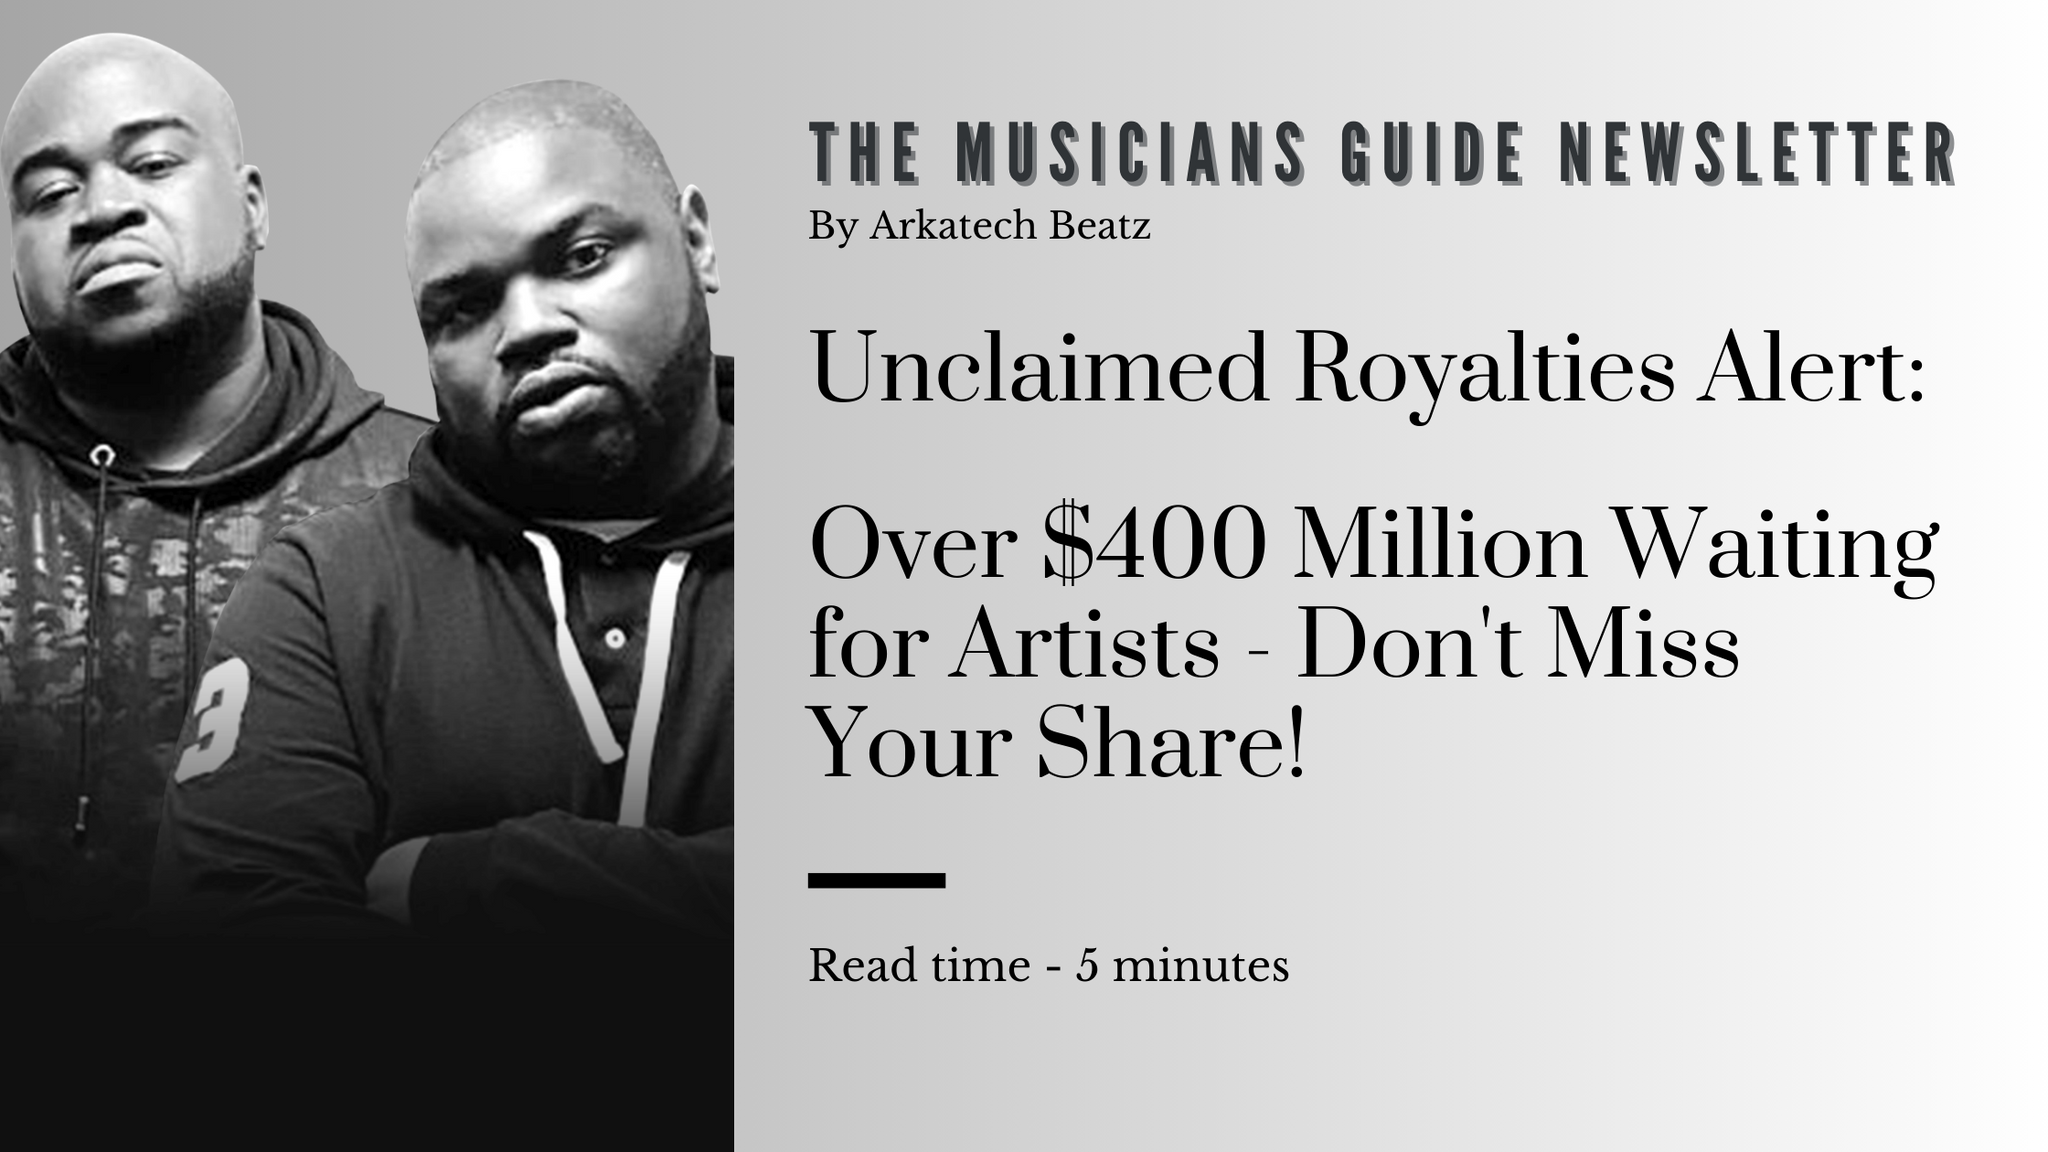 Unclaimed Royalties Alert: Over $400 Million Waiting for Artists - Don't Miss Your Share!